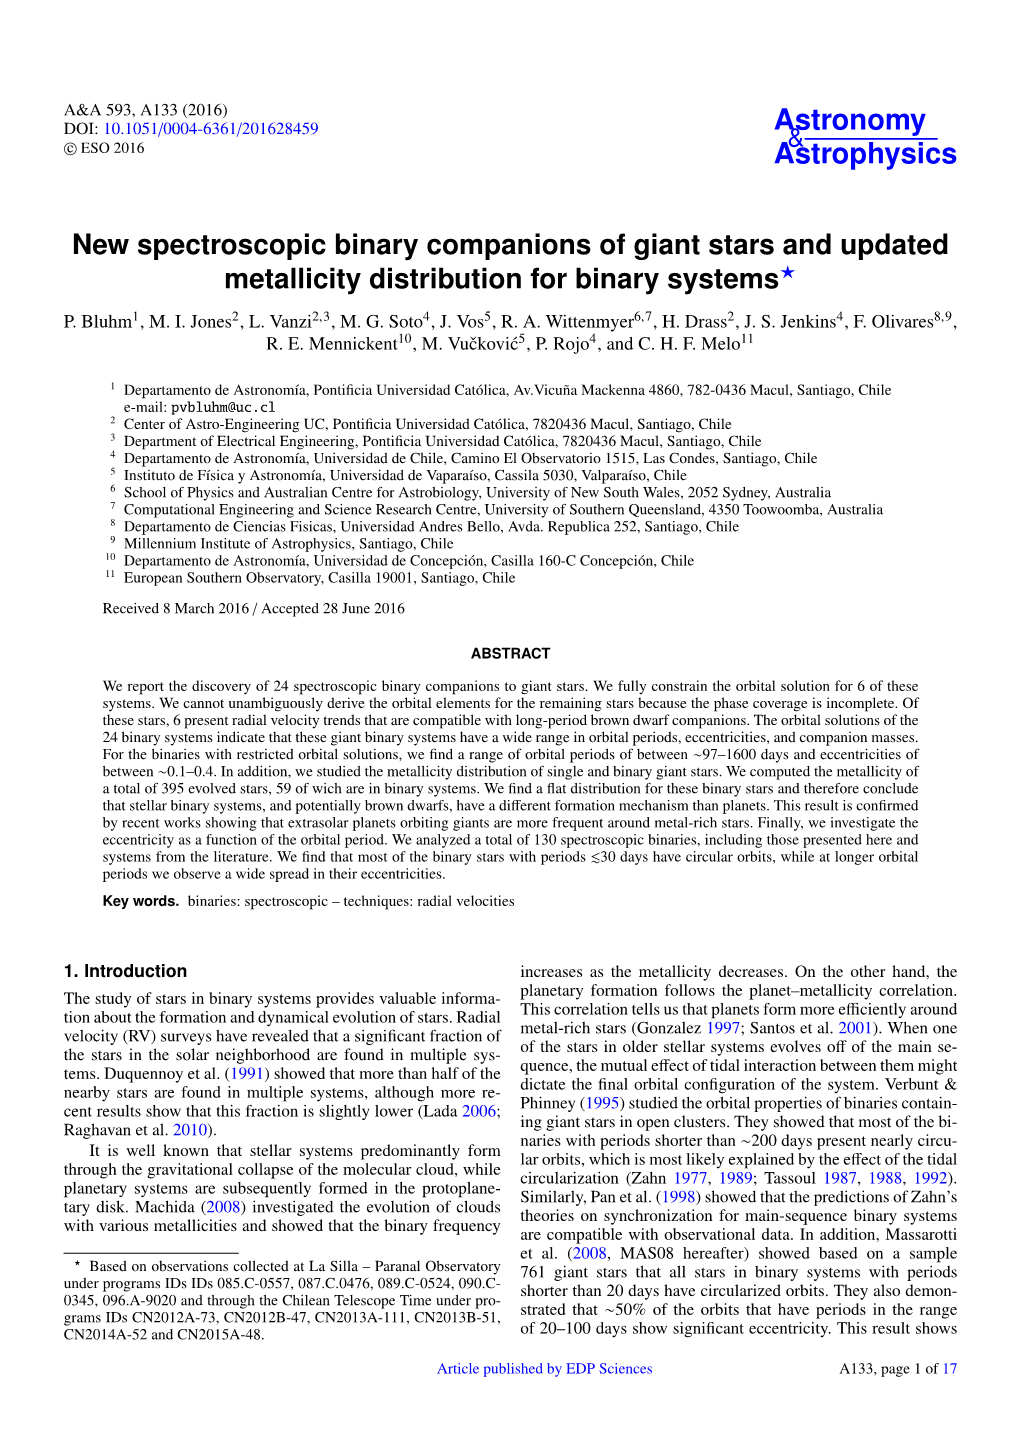 New Spectroscopic Binary Companions of Giant Stars and Updated Metallicity Distribution for Binary Systems? P